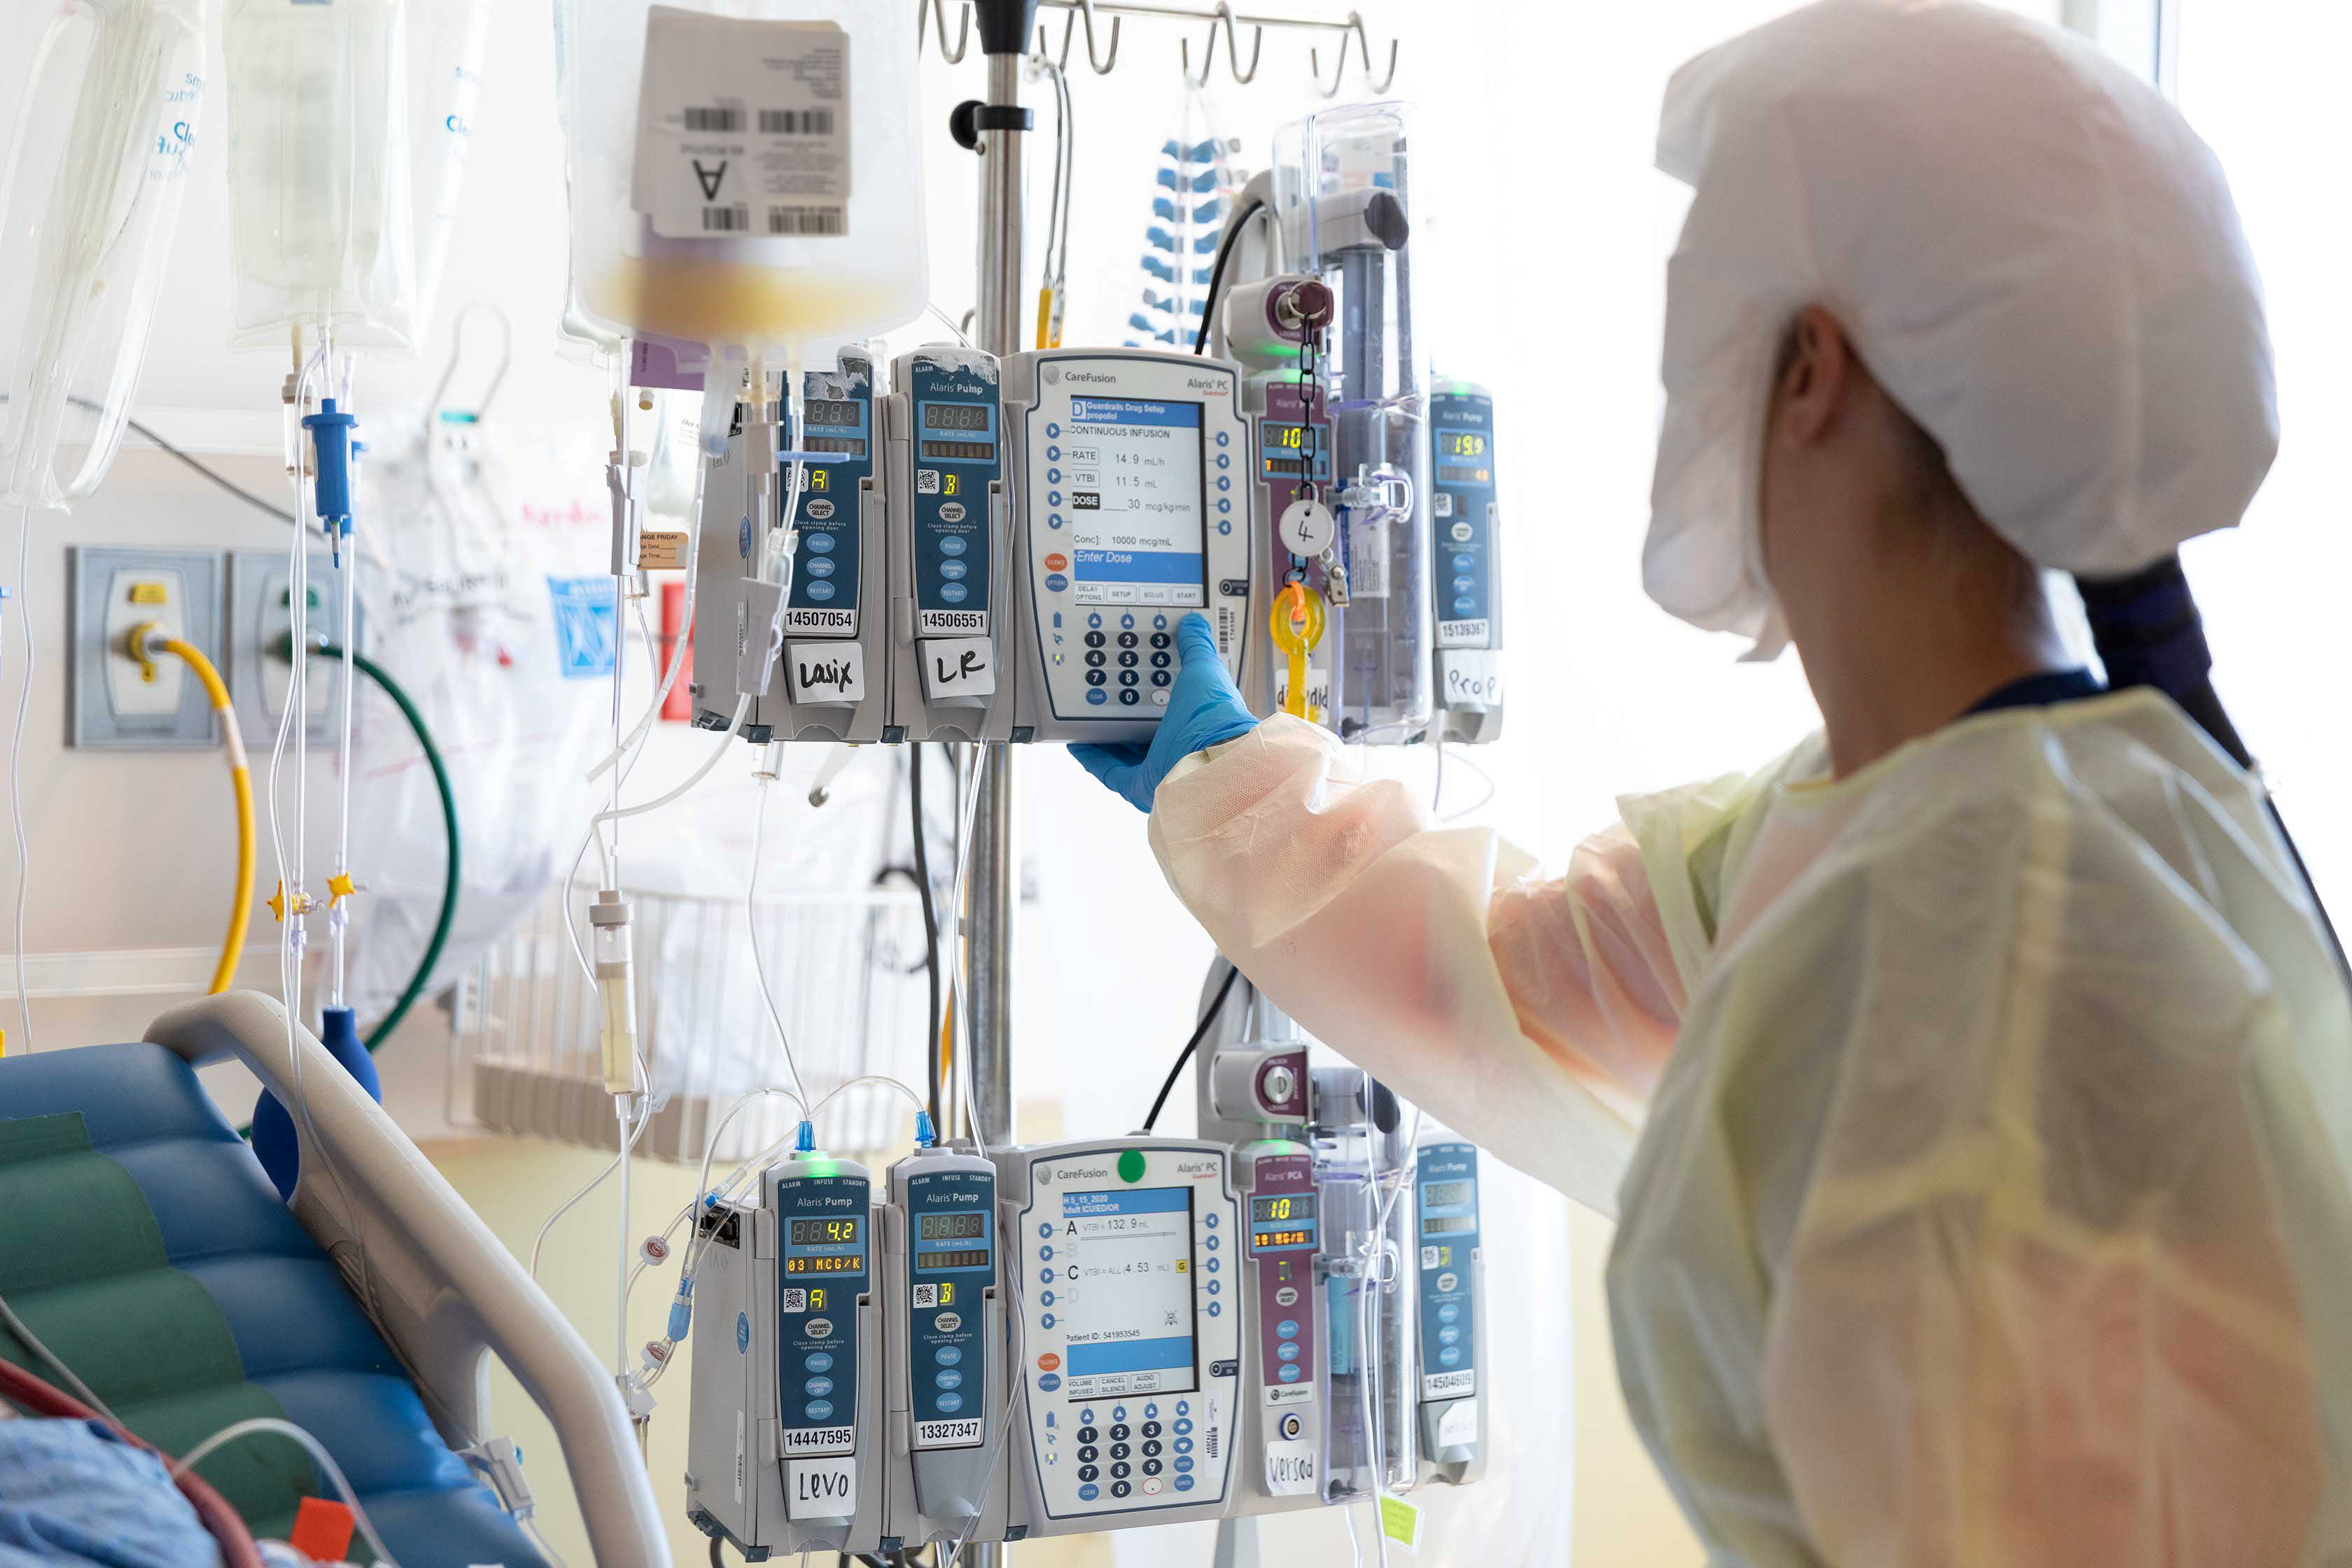 COVID patients swell ICUs, providers face burnout as Utah cases rise